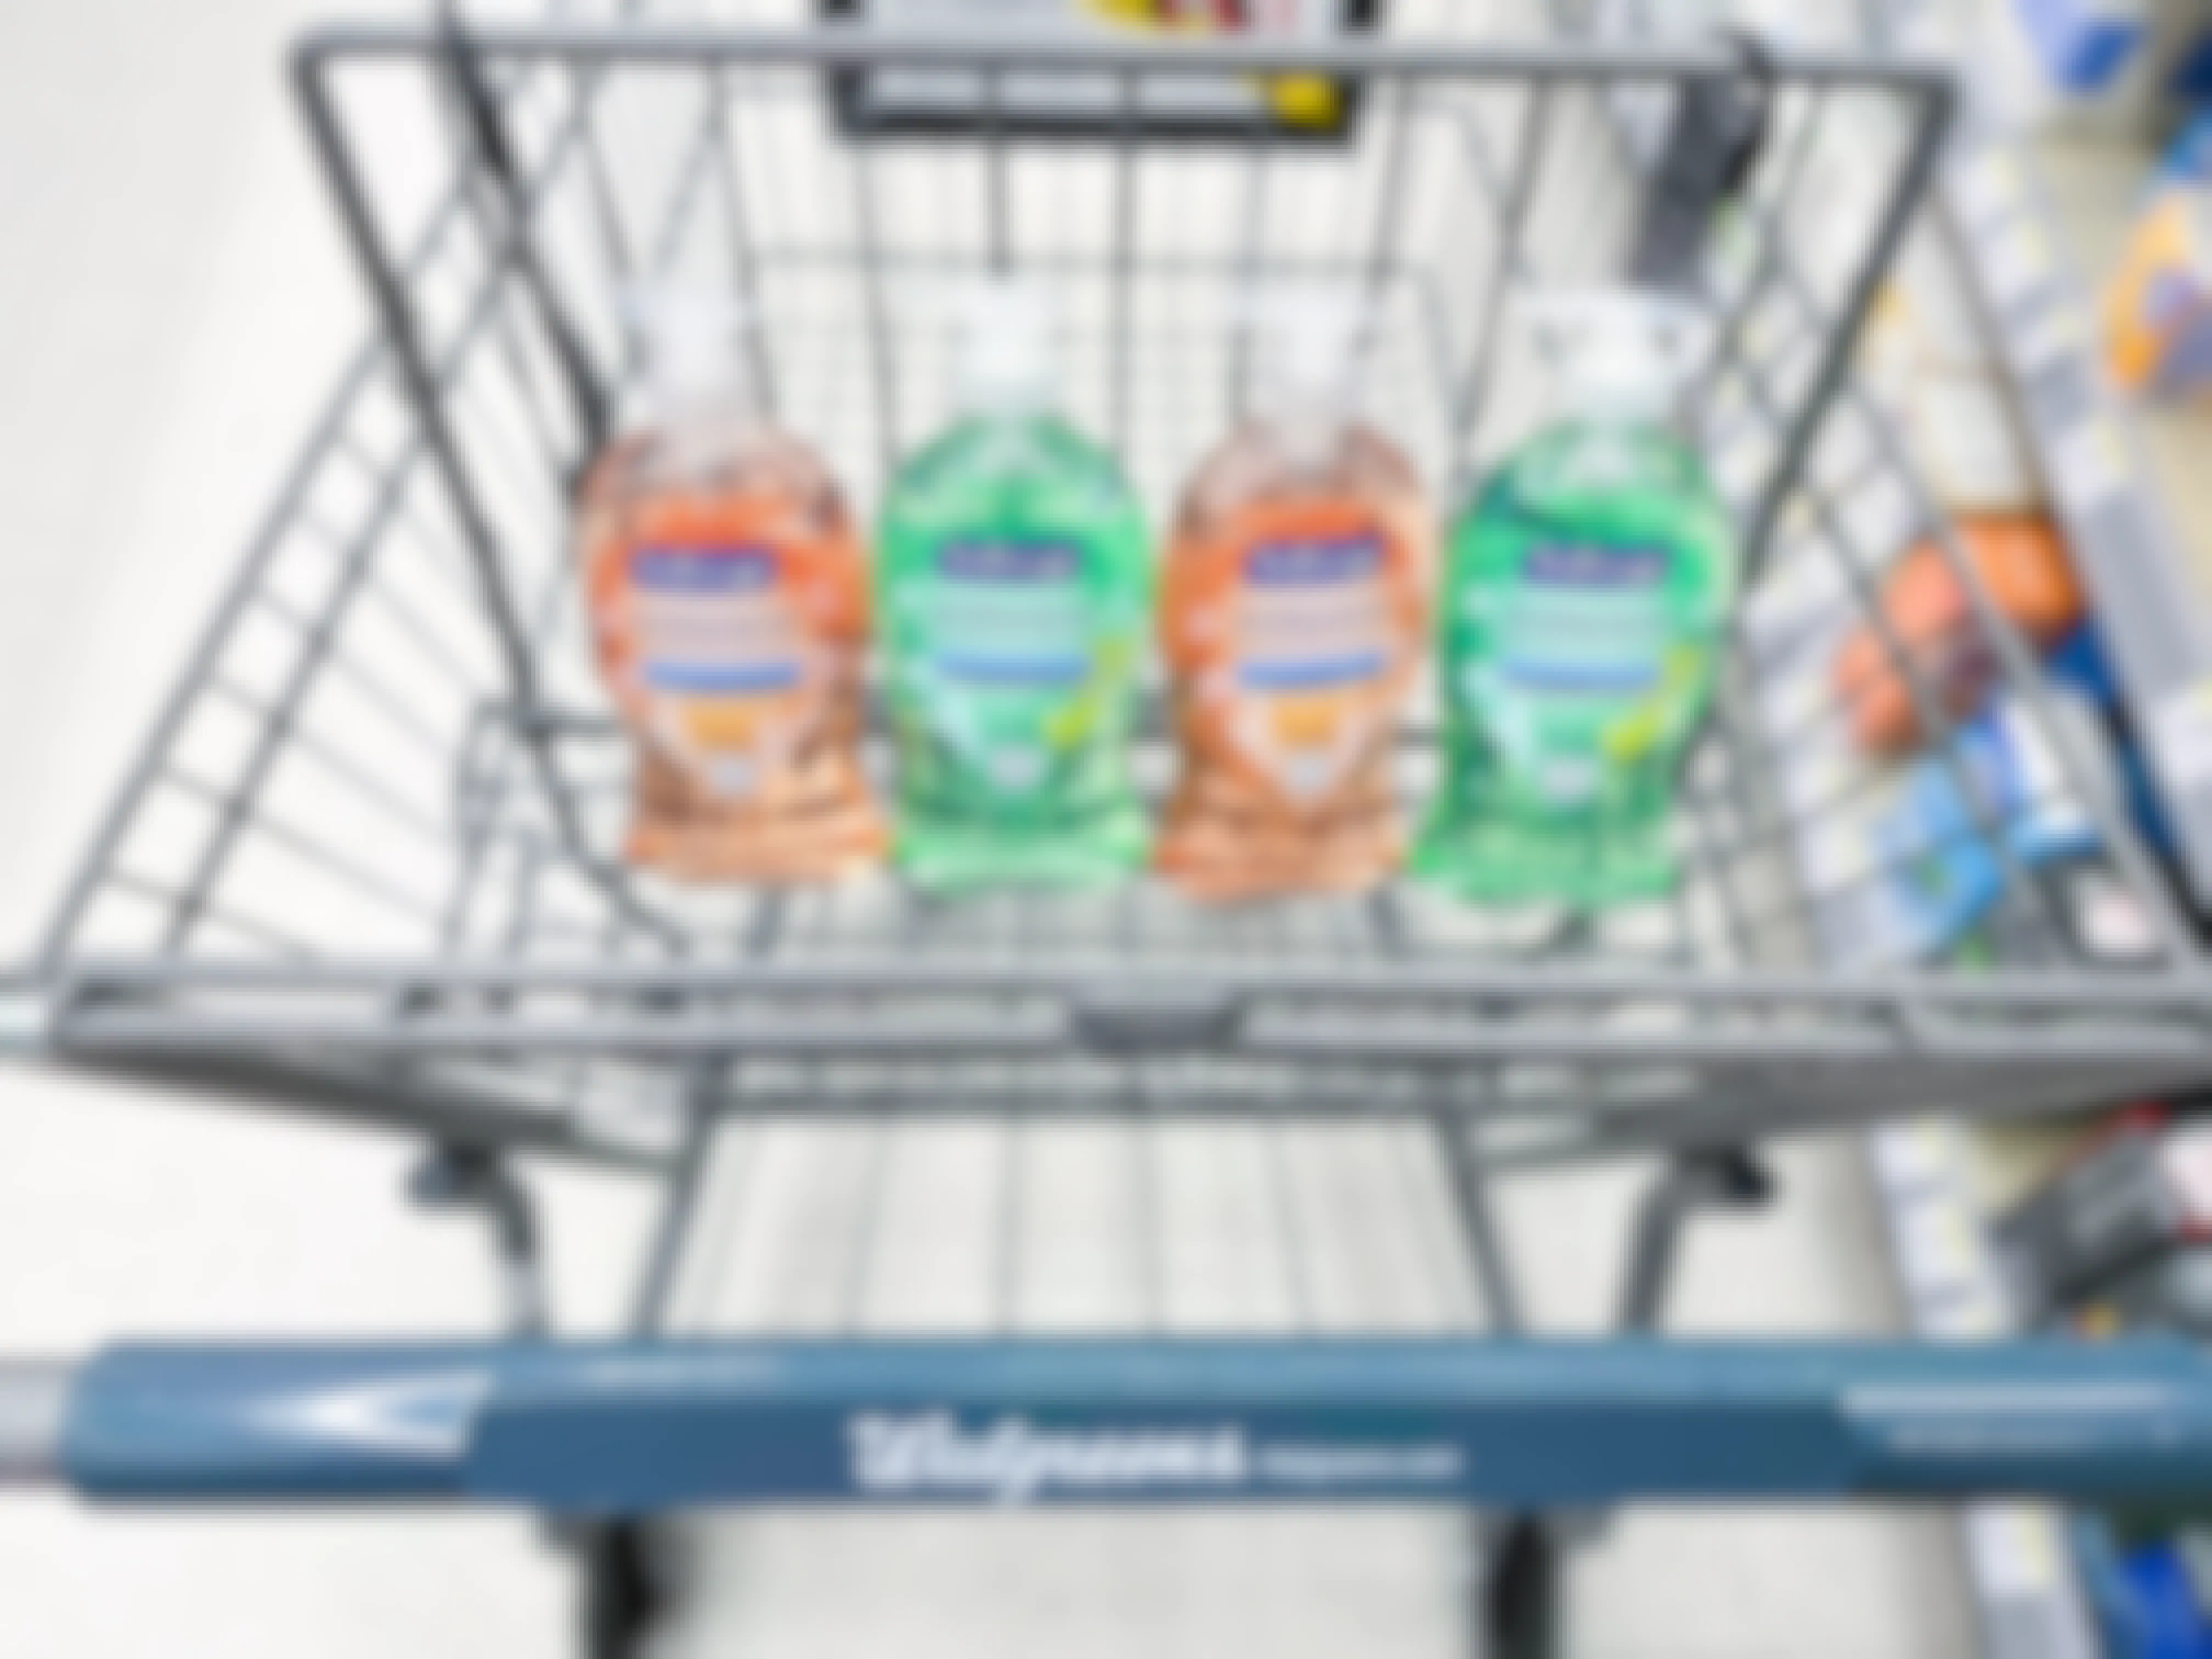 four bottles of Softsoap hand soap sitting in the basket portion of a Walgreens cart